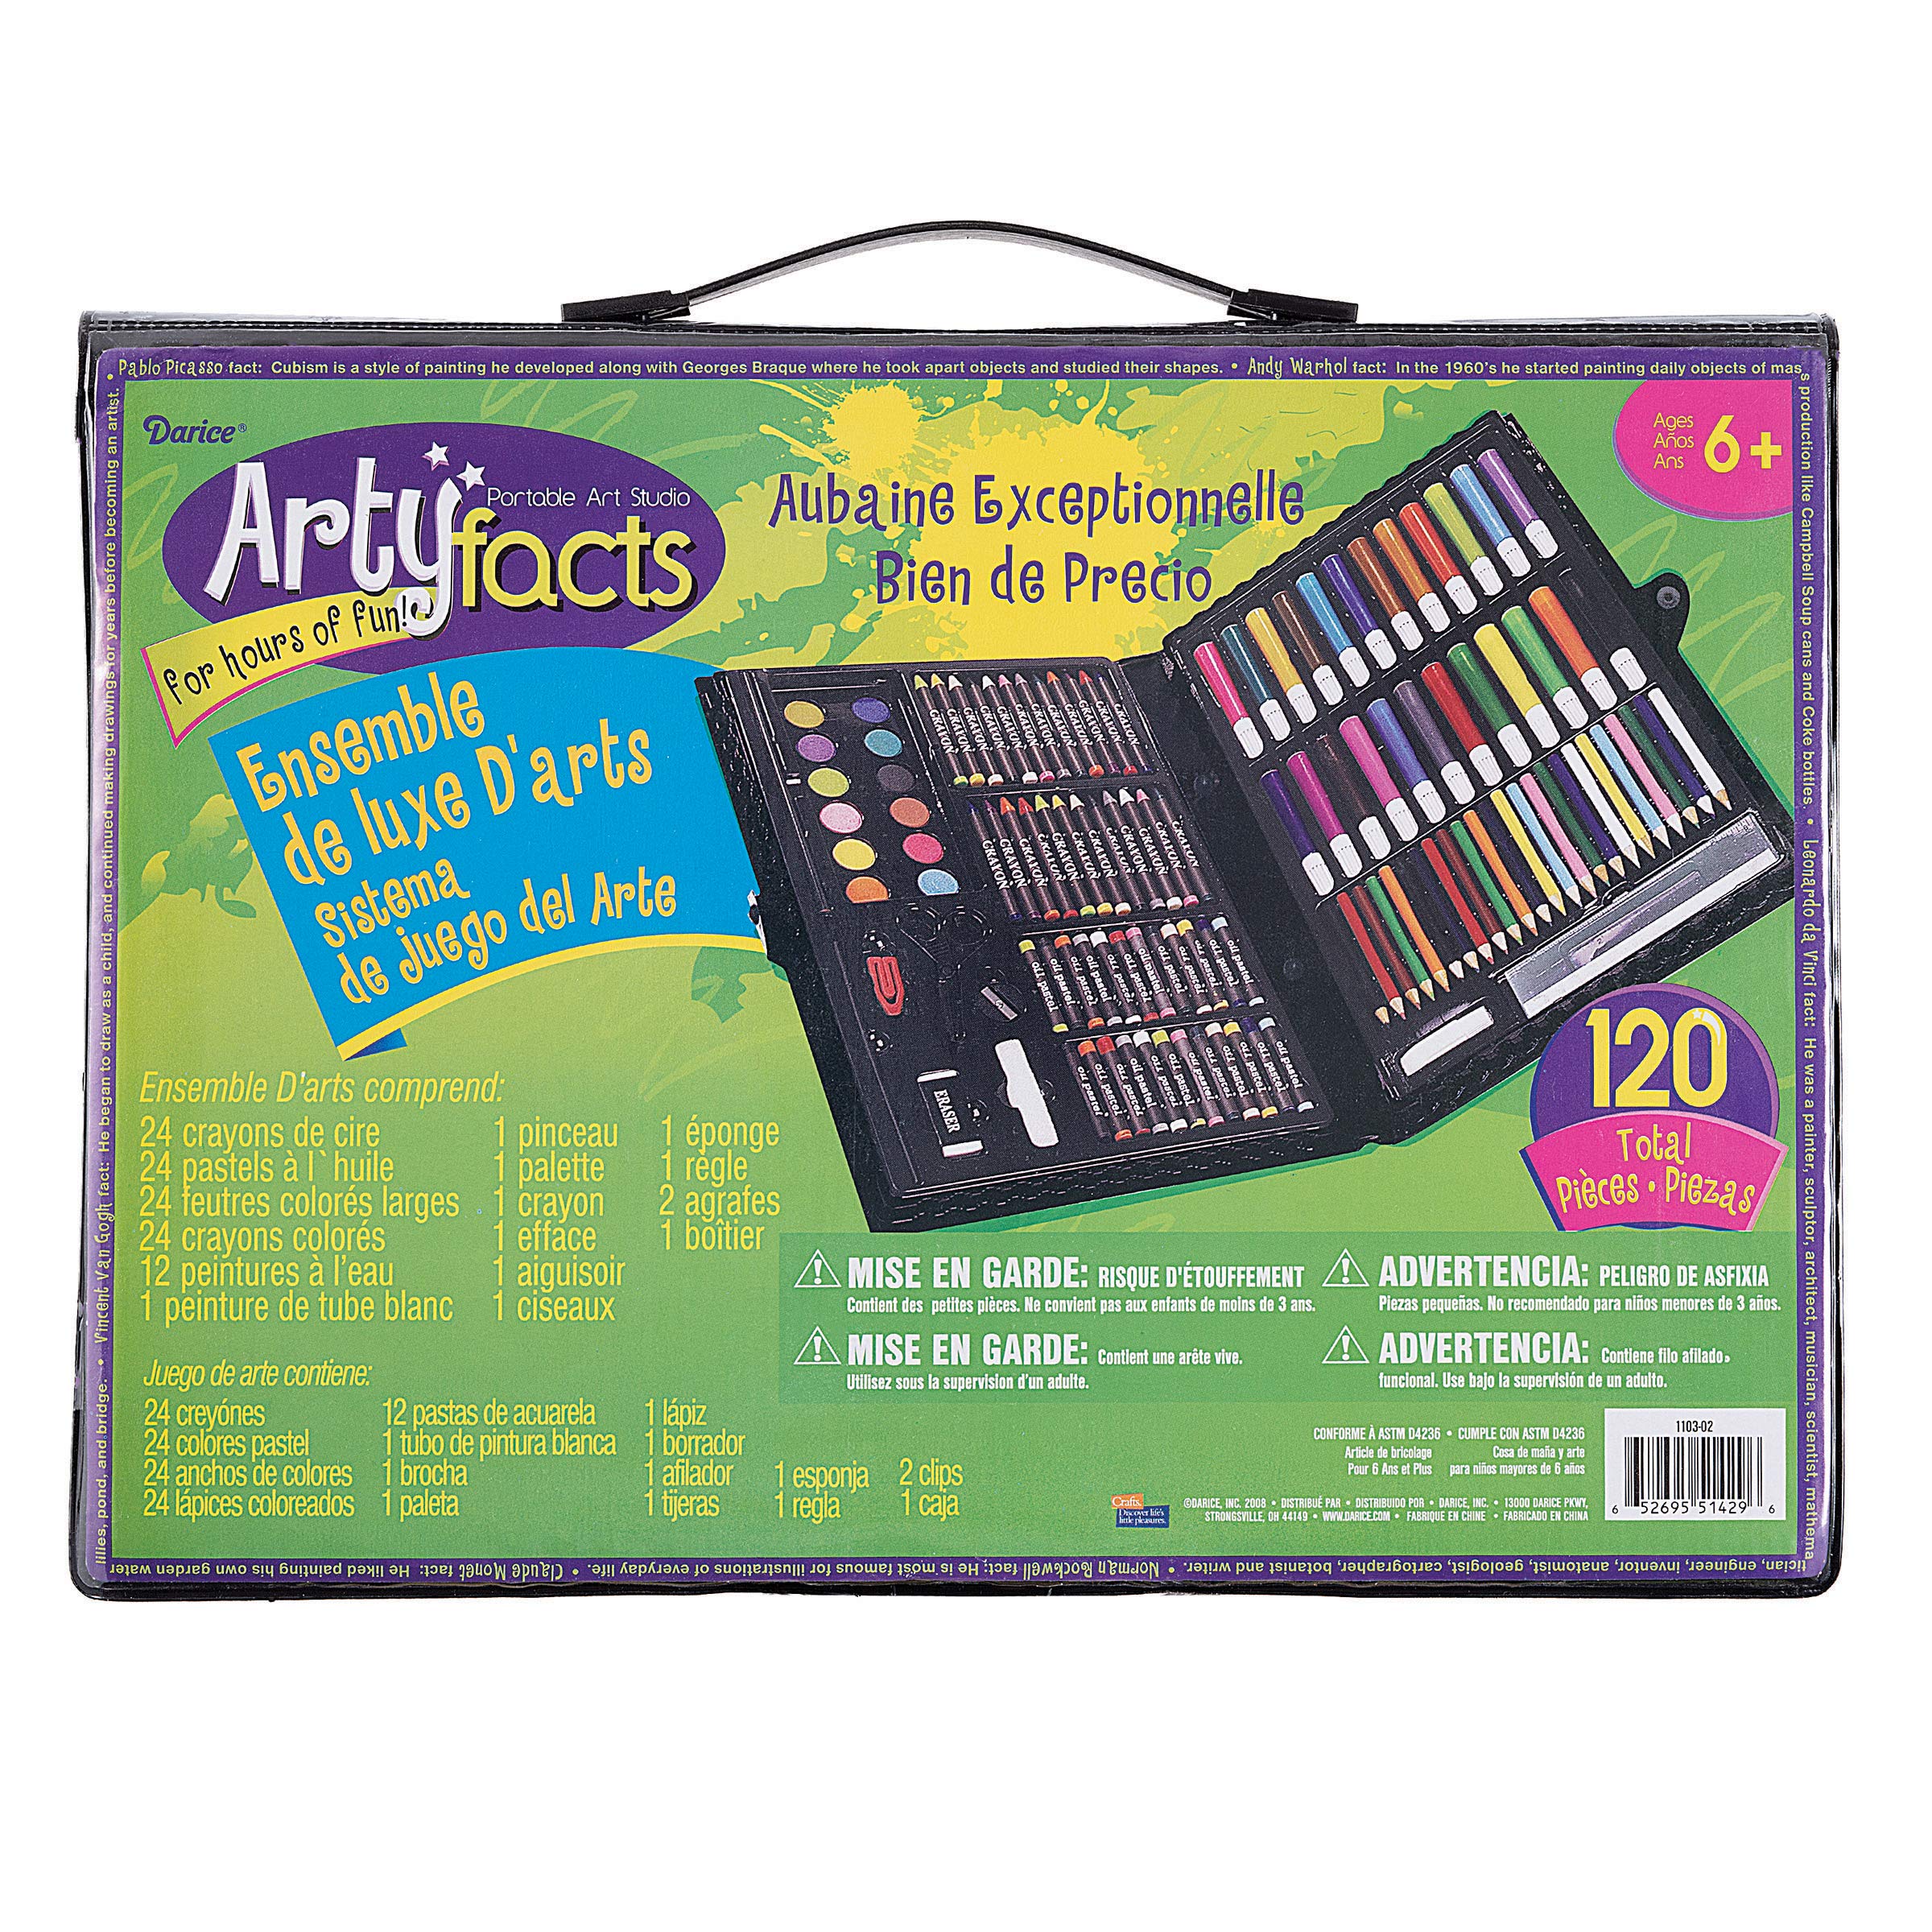 Darice 120-Piece Deluxe Art Set – Art Supplies for Drawing, Painting and More in a Plastic Case - Makes a Great Gift for Children and Adults